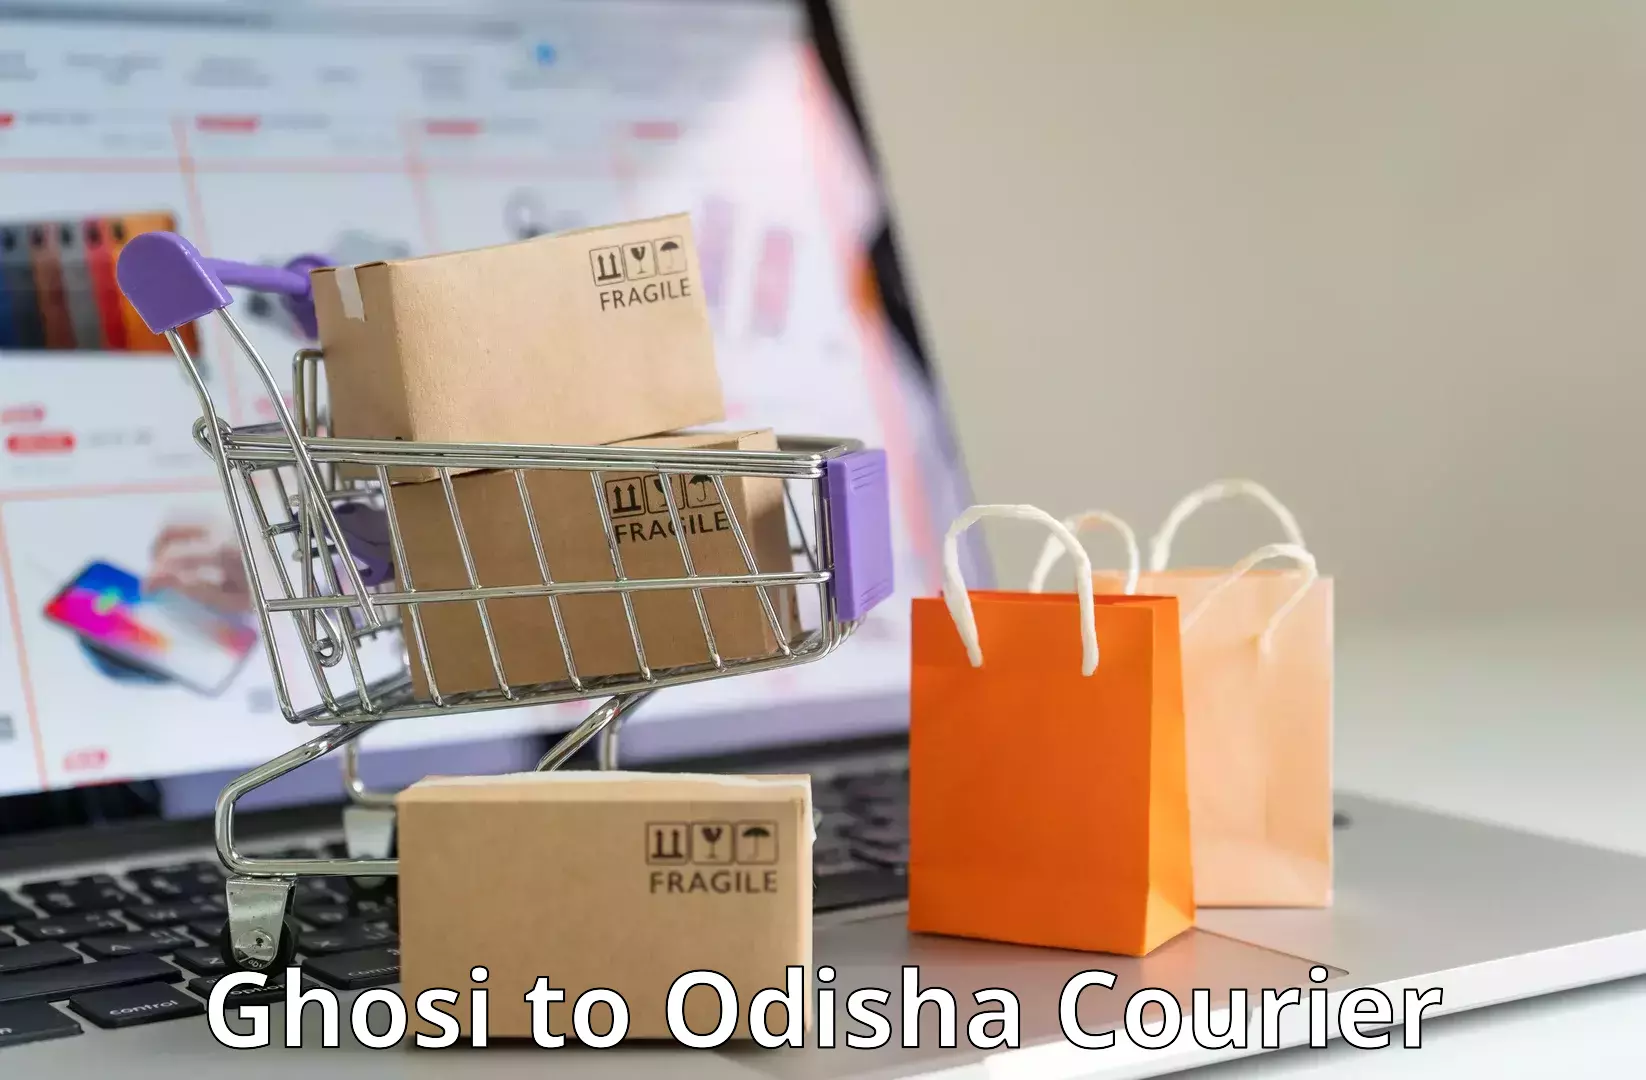 Local delivery service Ghosi to Mathili